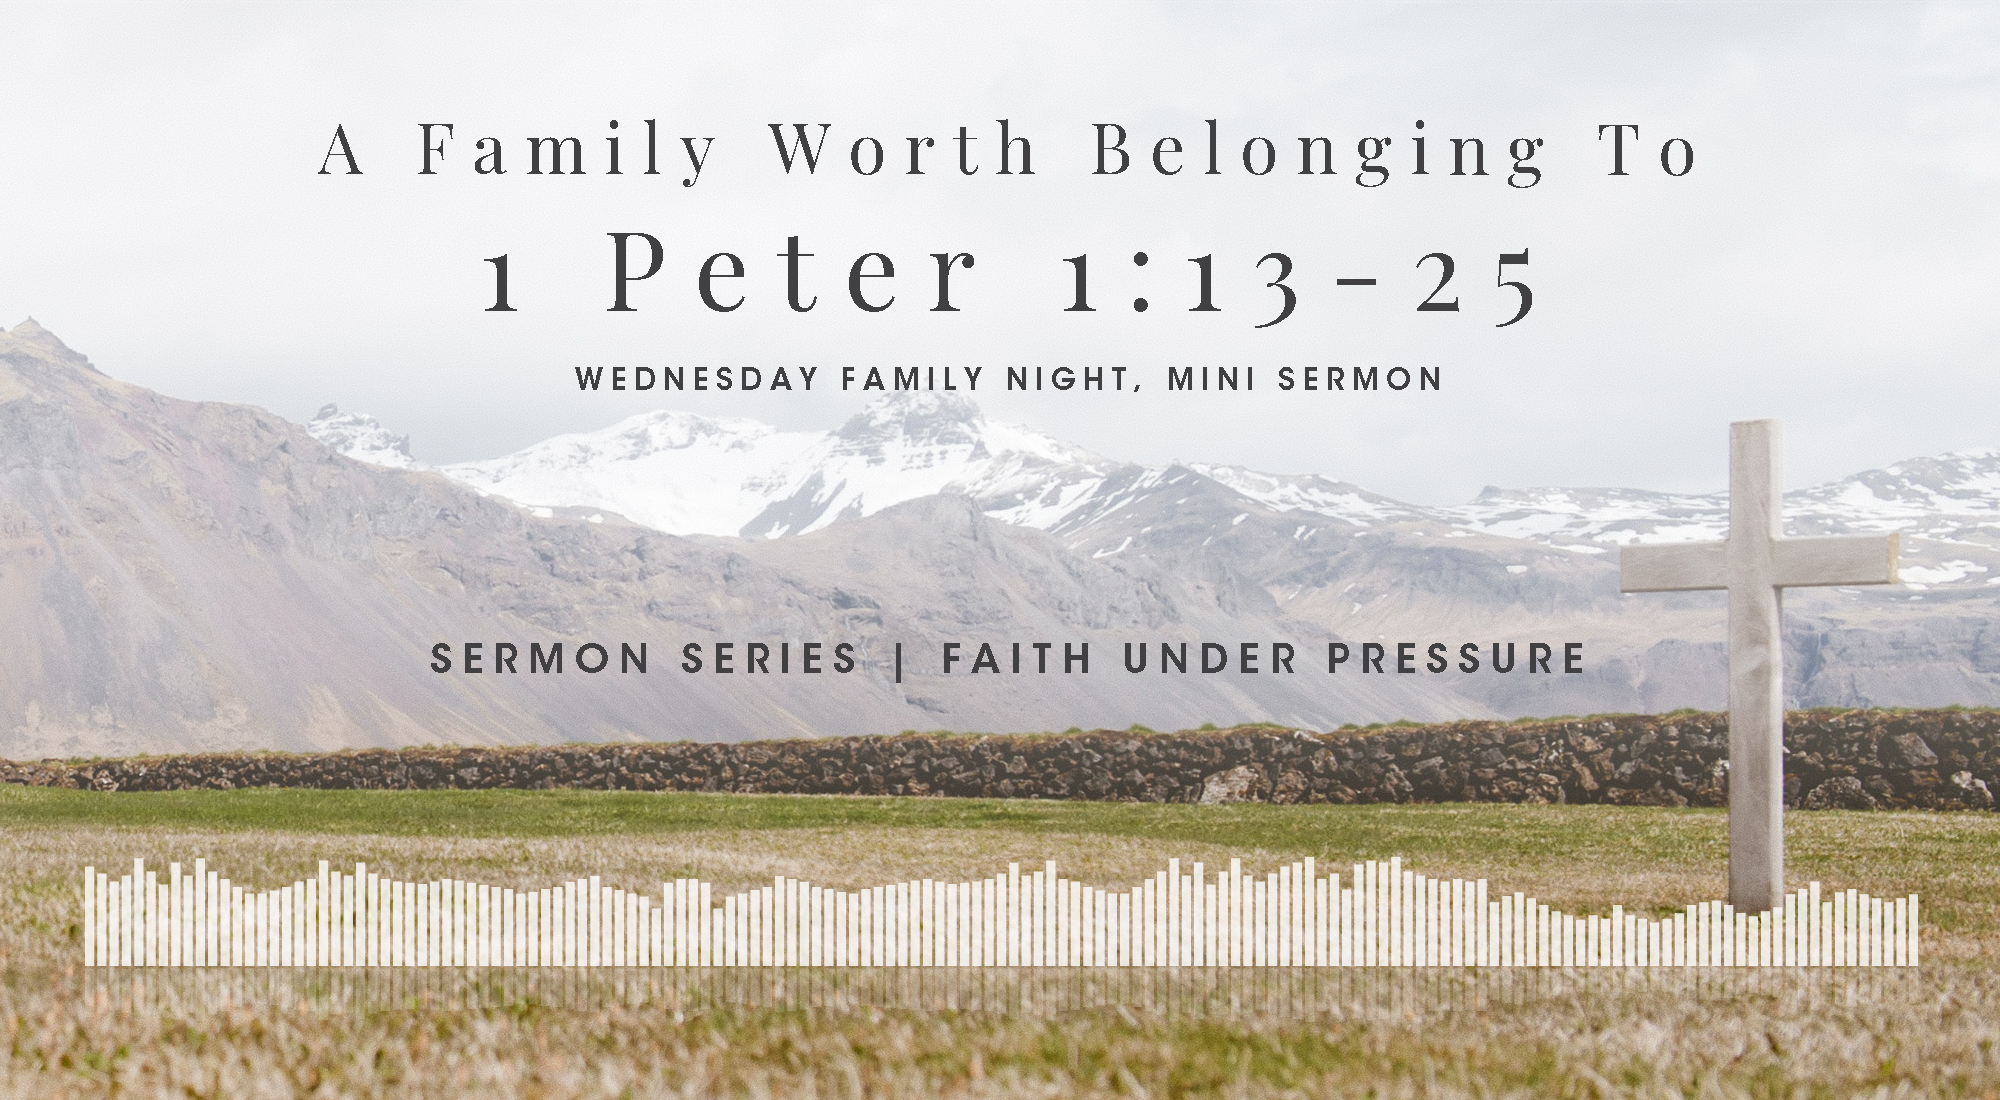 A Family Worth Belonging To, A Mini Bible Study in 1 Peter 1:13-25, From Our Faith Under Pressure Sermon Series, Wyandotte County Christian Church Wednesday Family Night